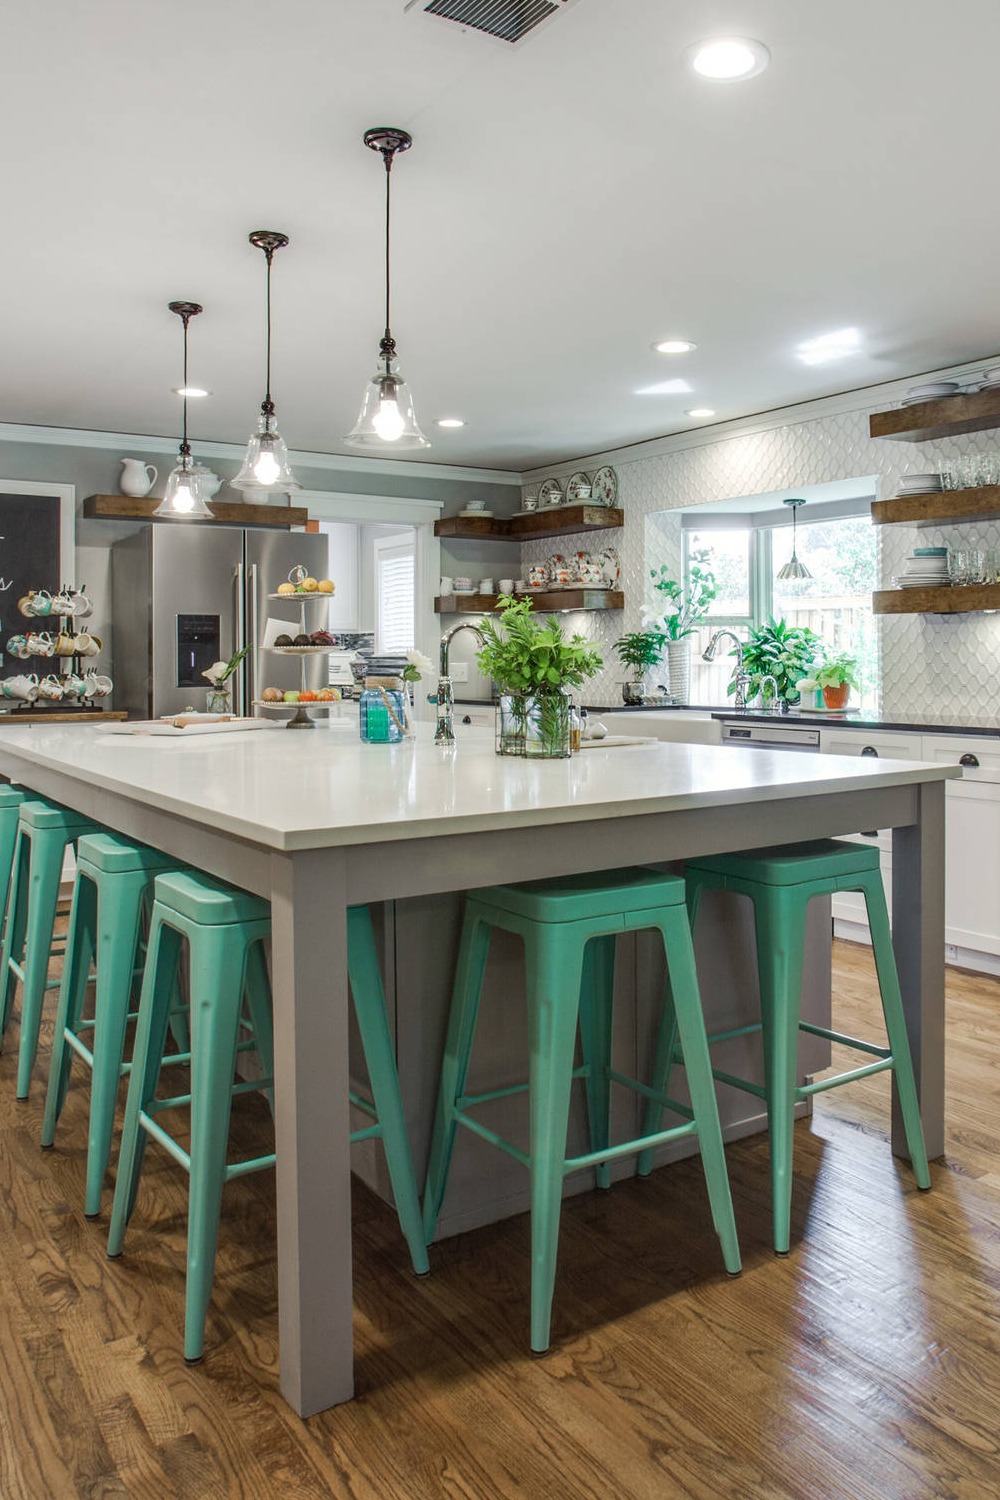 Bring Color Extra Punch Green Blue Introduce Color Eye Catching British Kitchen Room Space